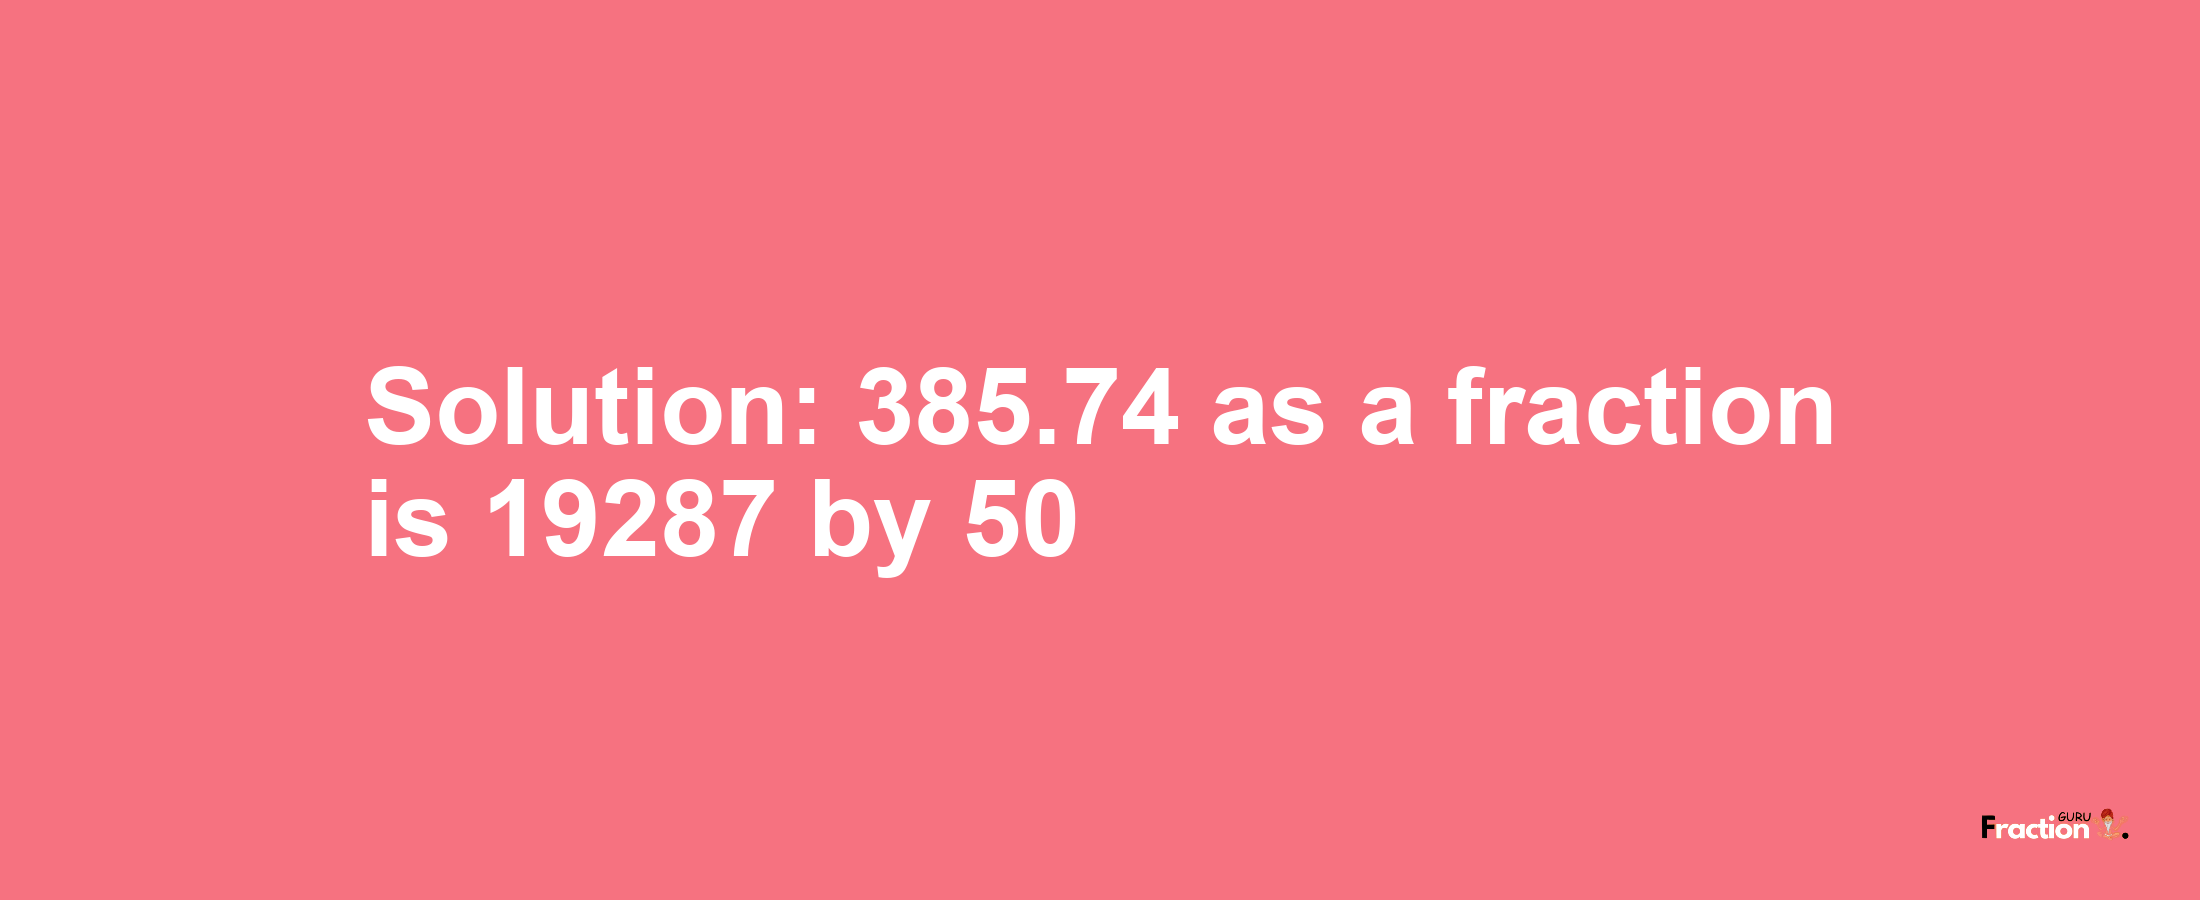 Solution:385.74 as a fraction is 19287/50